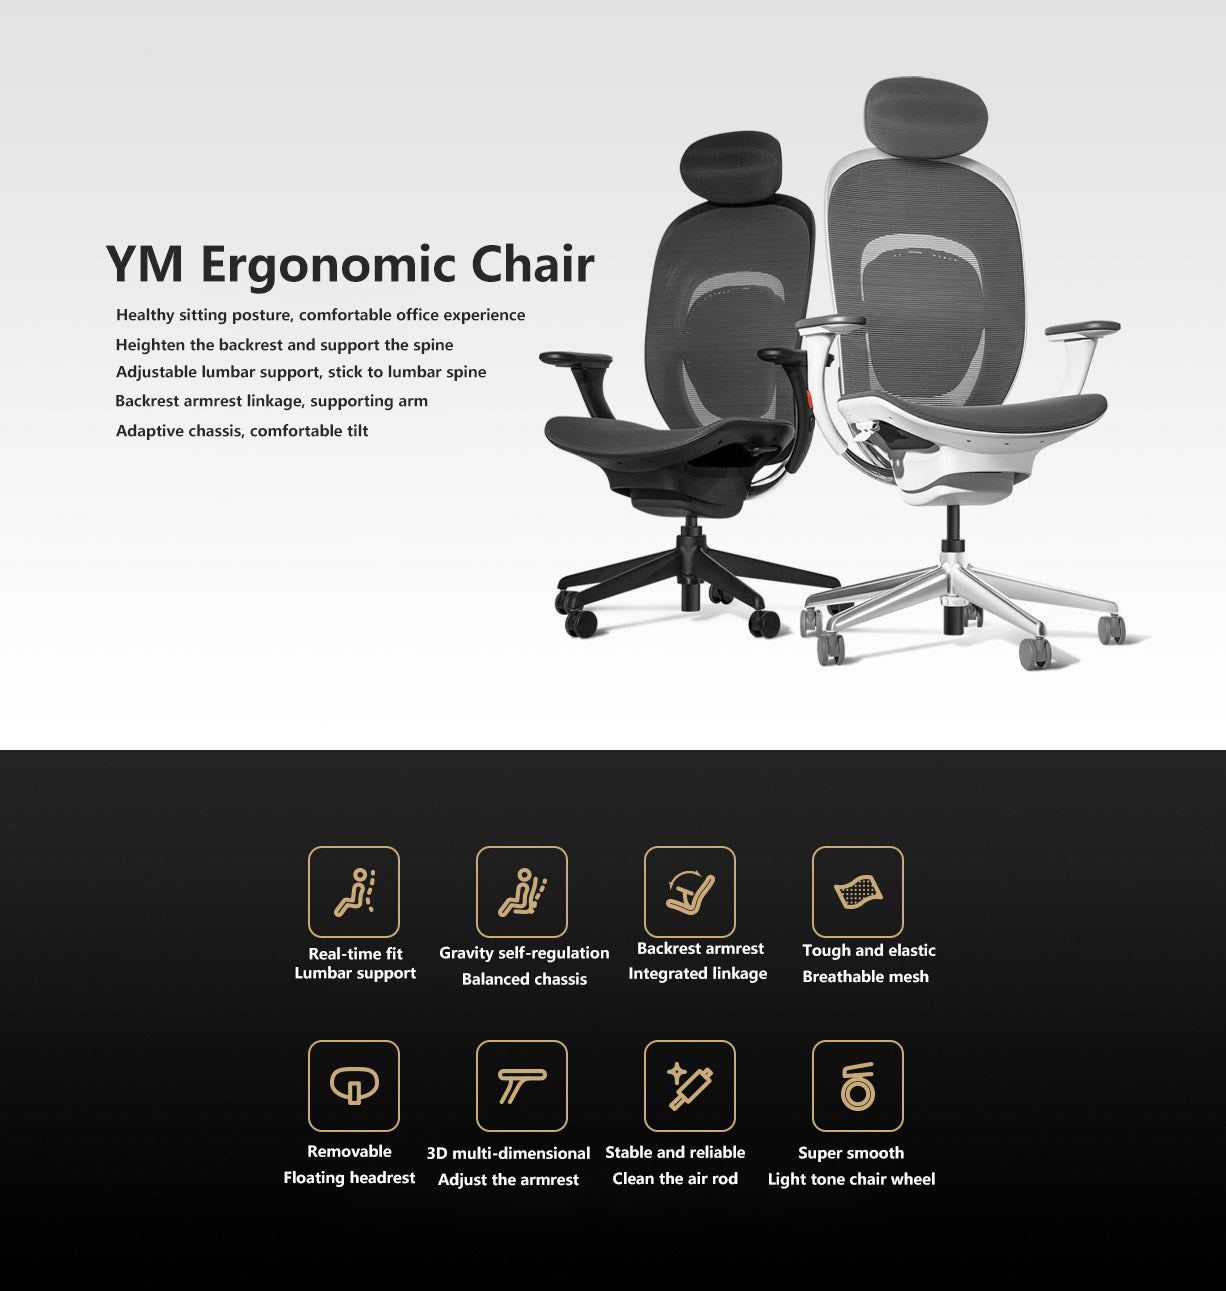 xiaomi ym office gaming chair in india furper